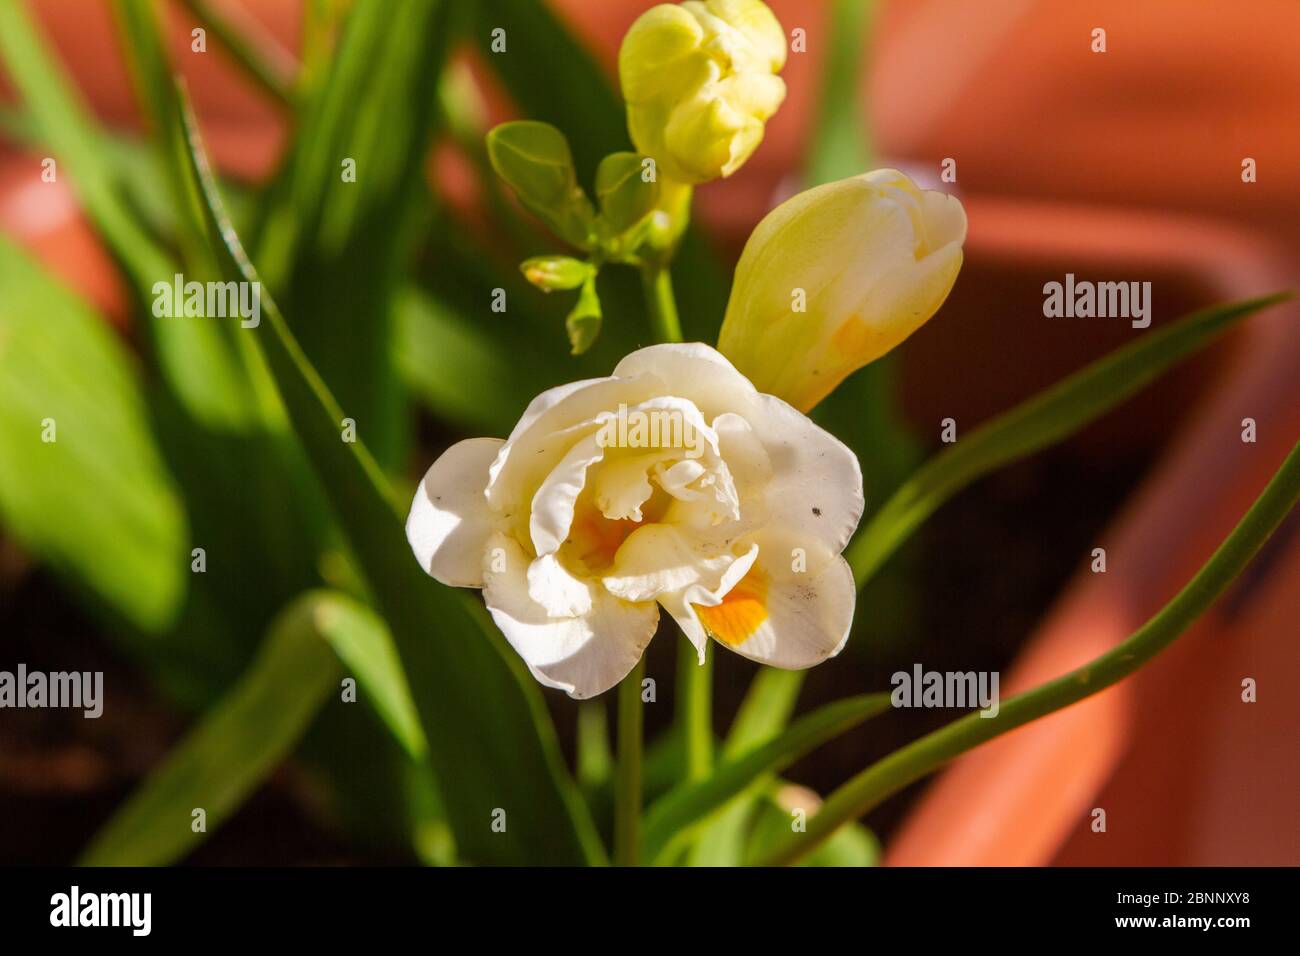 Close-up of freesia flowering plants on terrace pots, in natural light Stock Photo